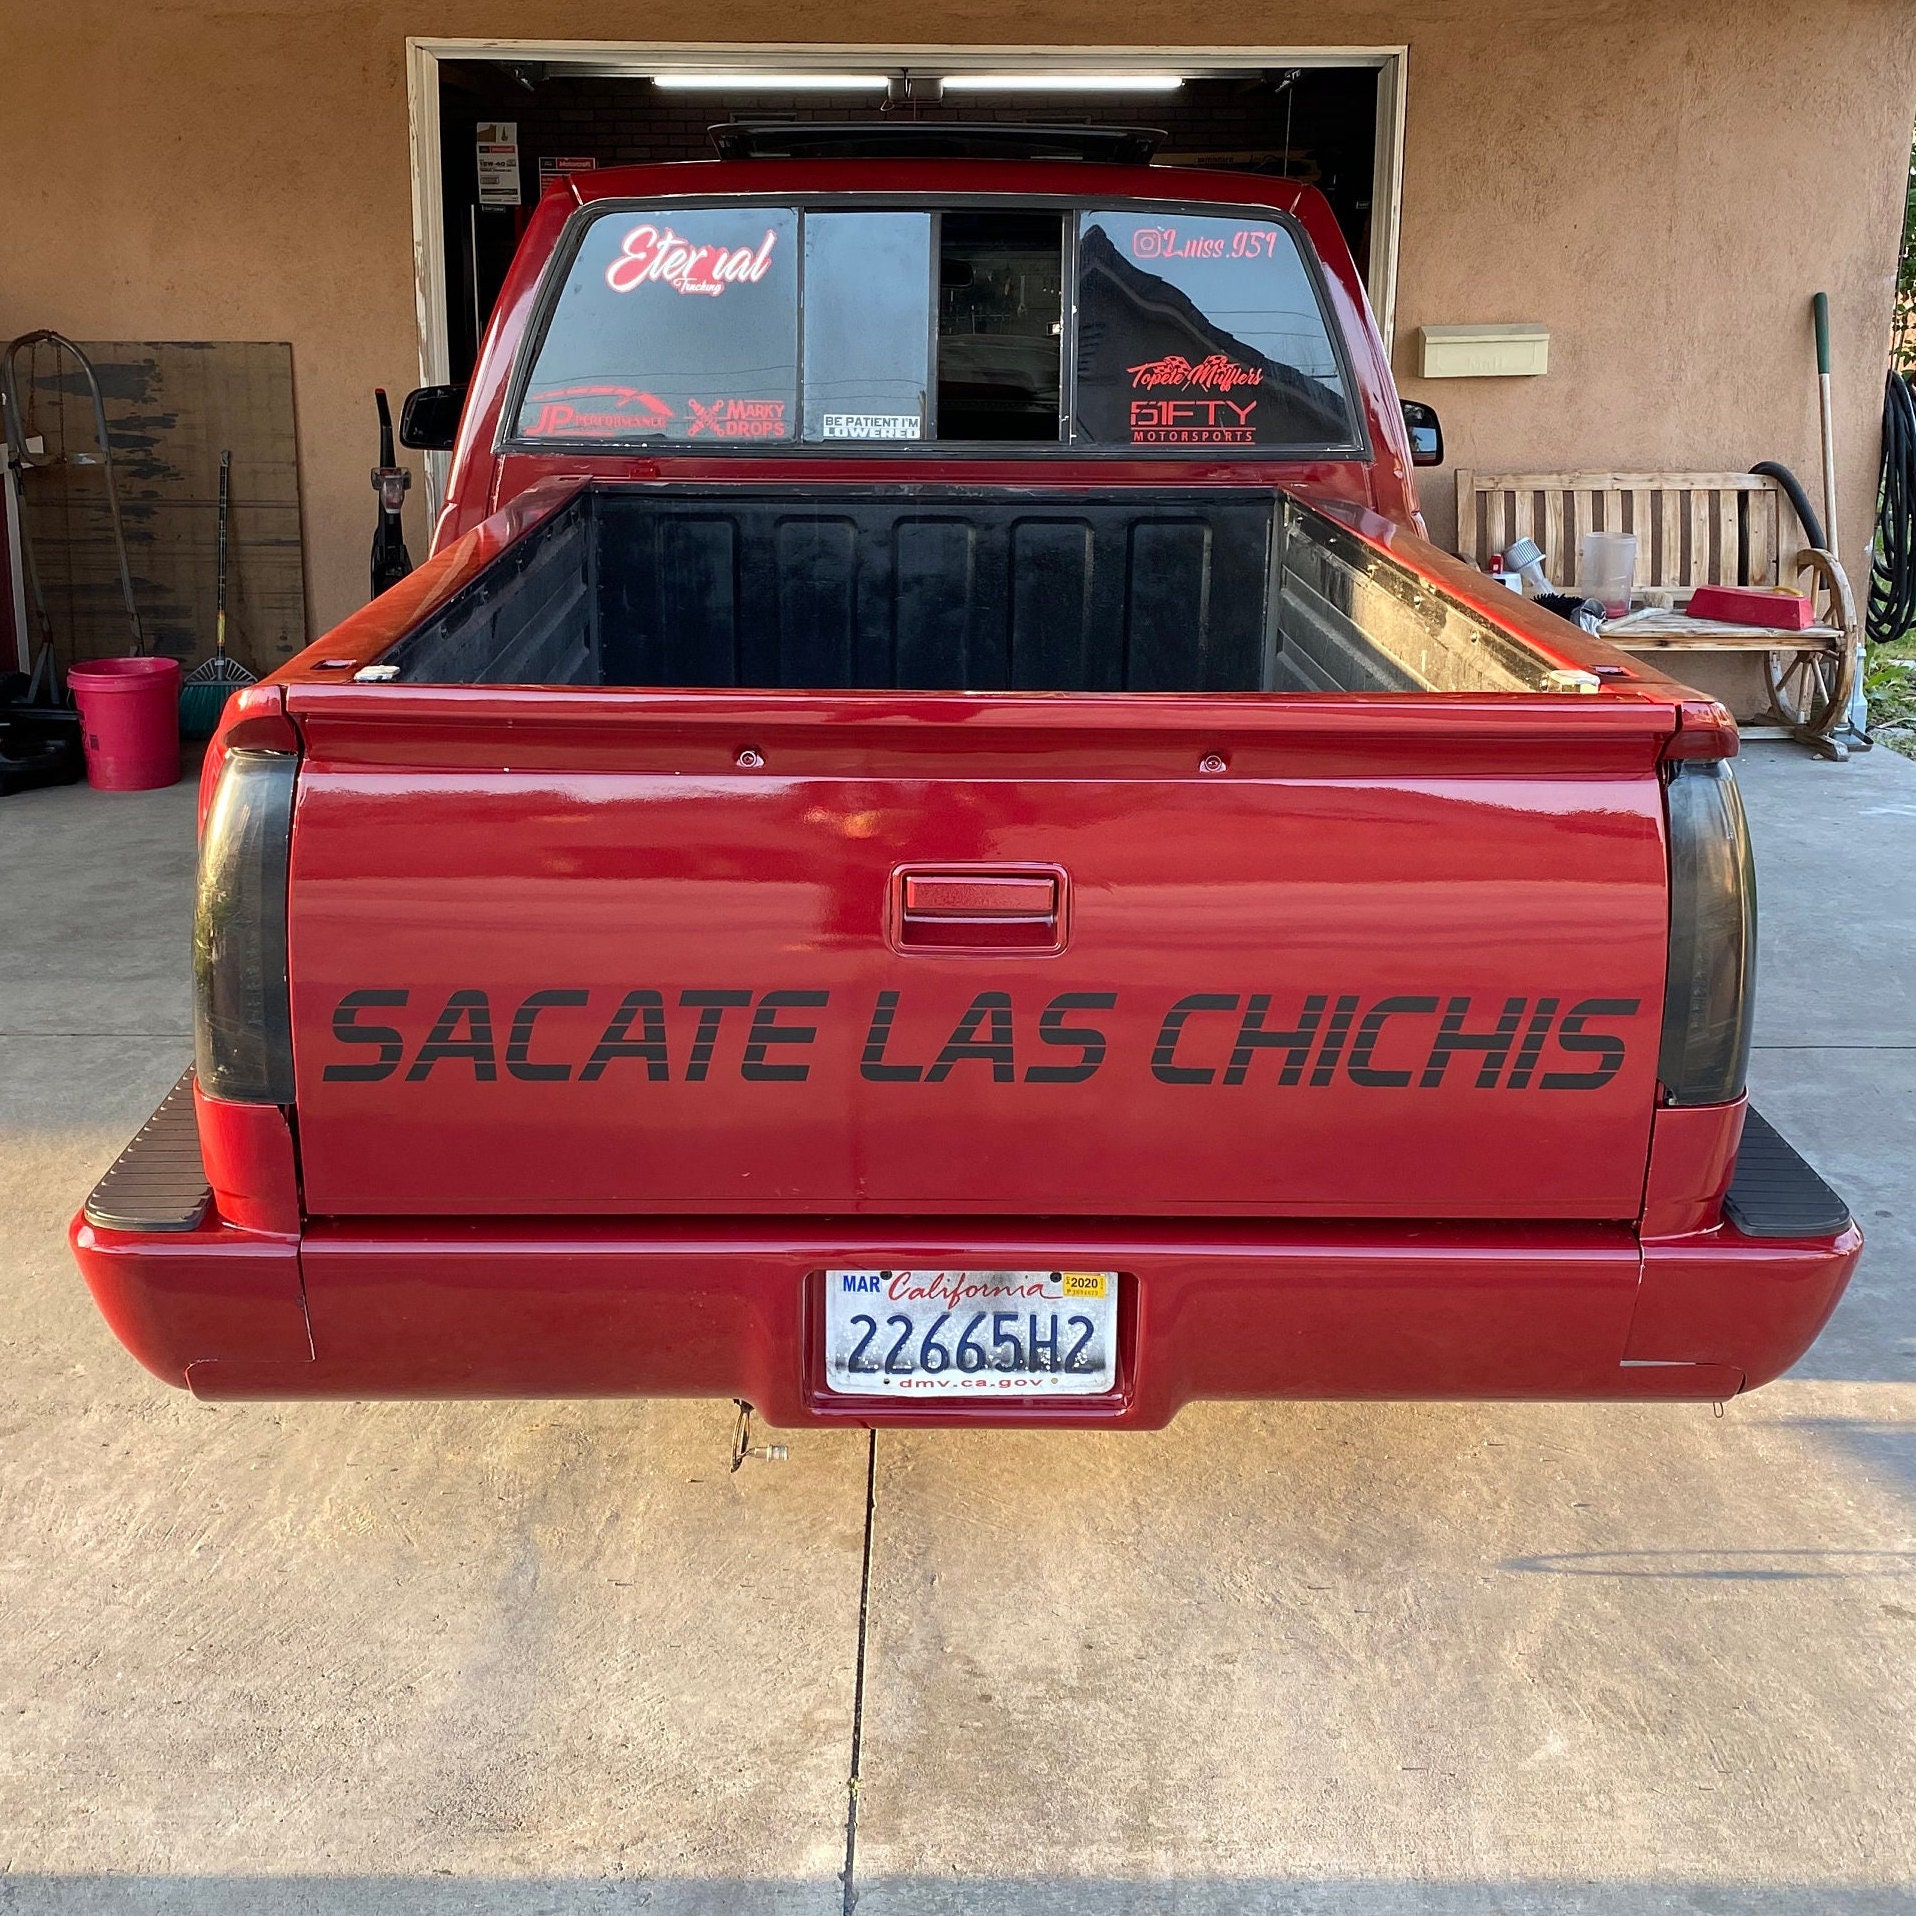 Sacate Las Chichis Tailgate Decal - Etsy